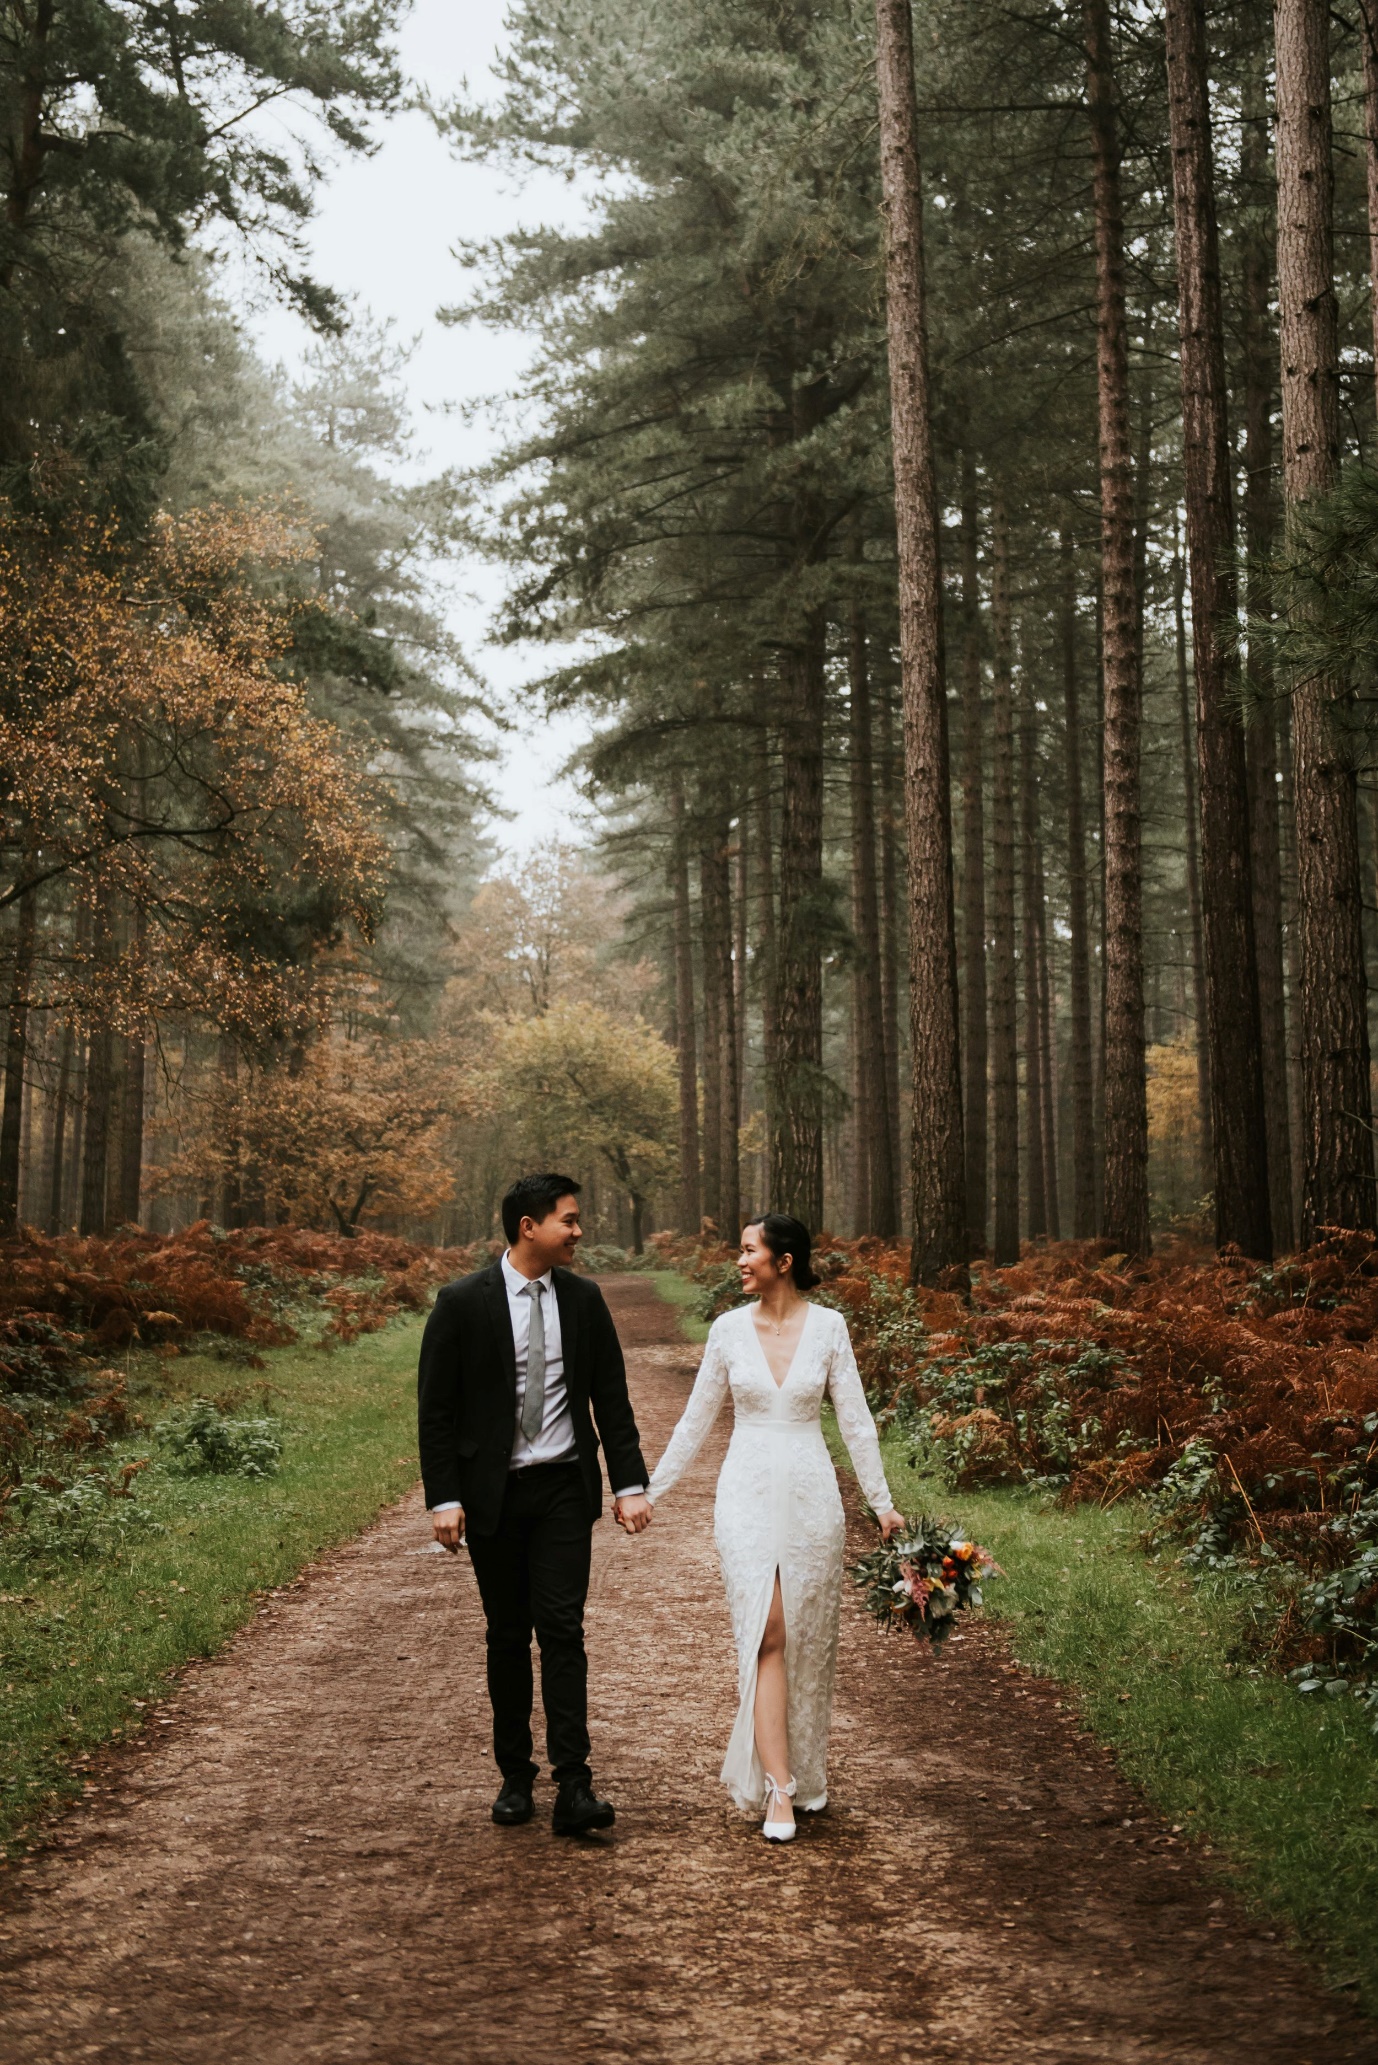 a couple in a forest for their pre-wedding photoshoot | Wedifys